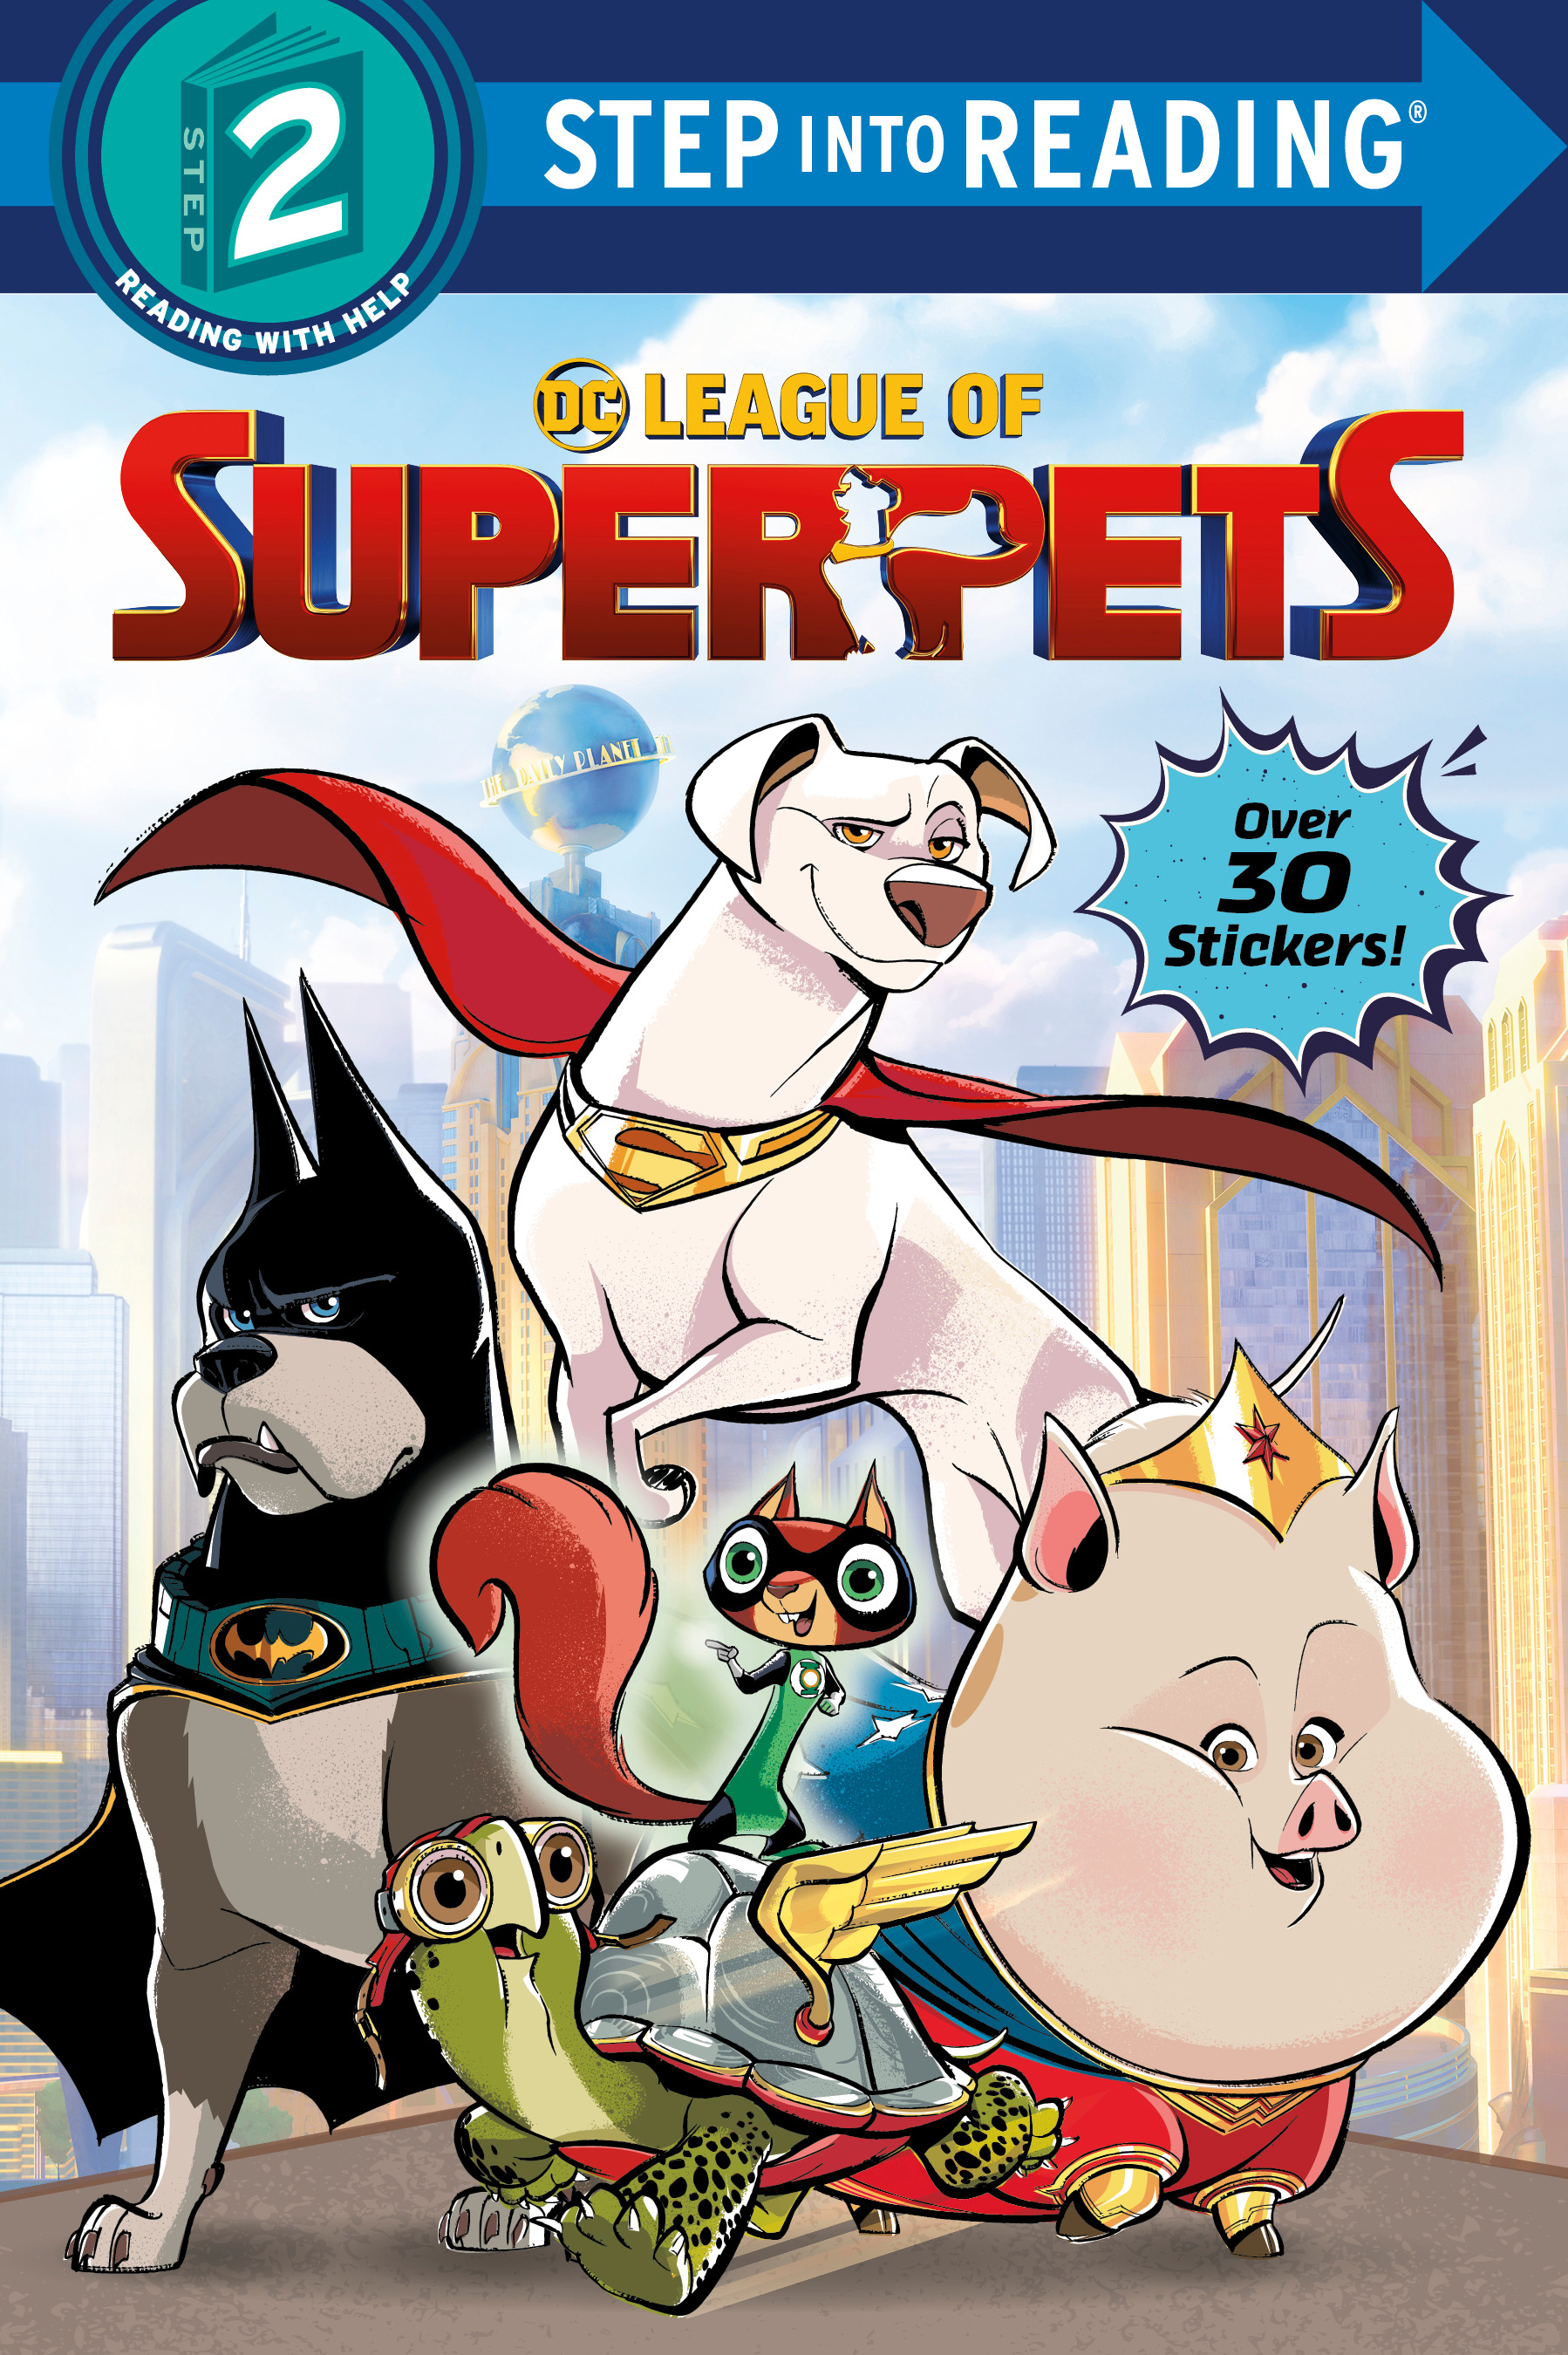 Step into Reading - DC League of Super-Pets : Includes over 30 stickers! | First reader